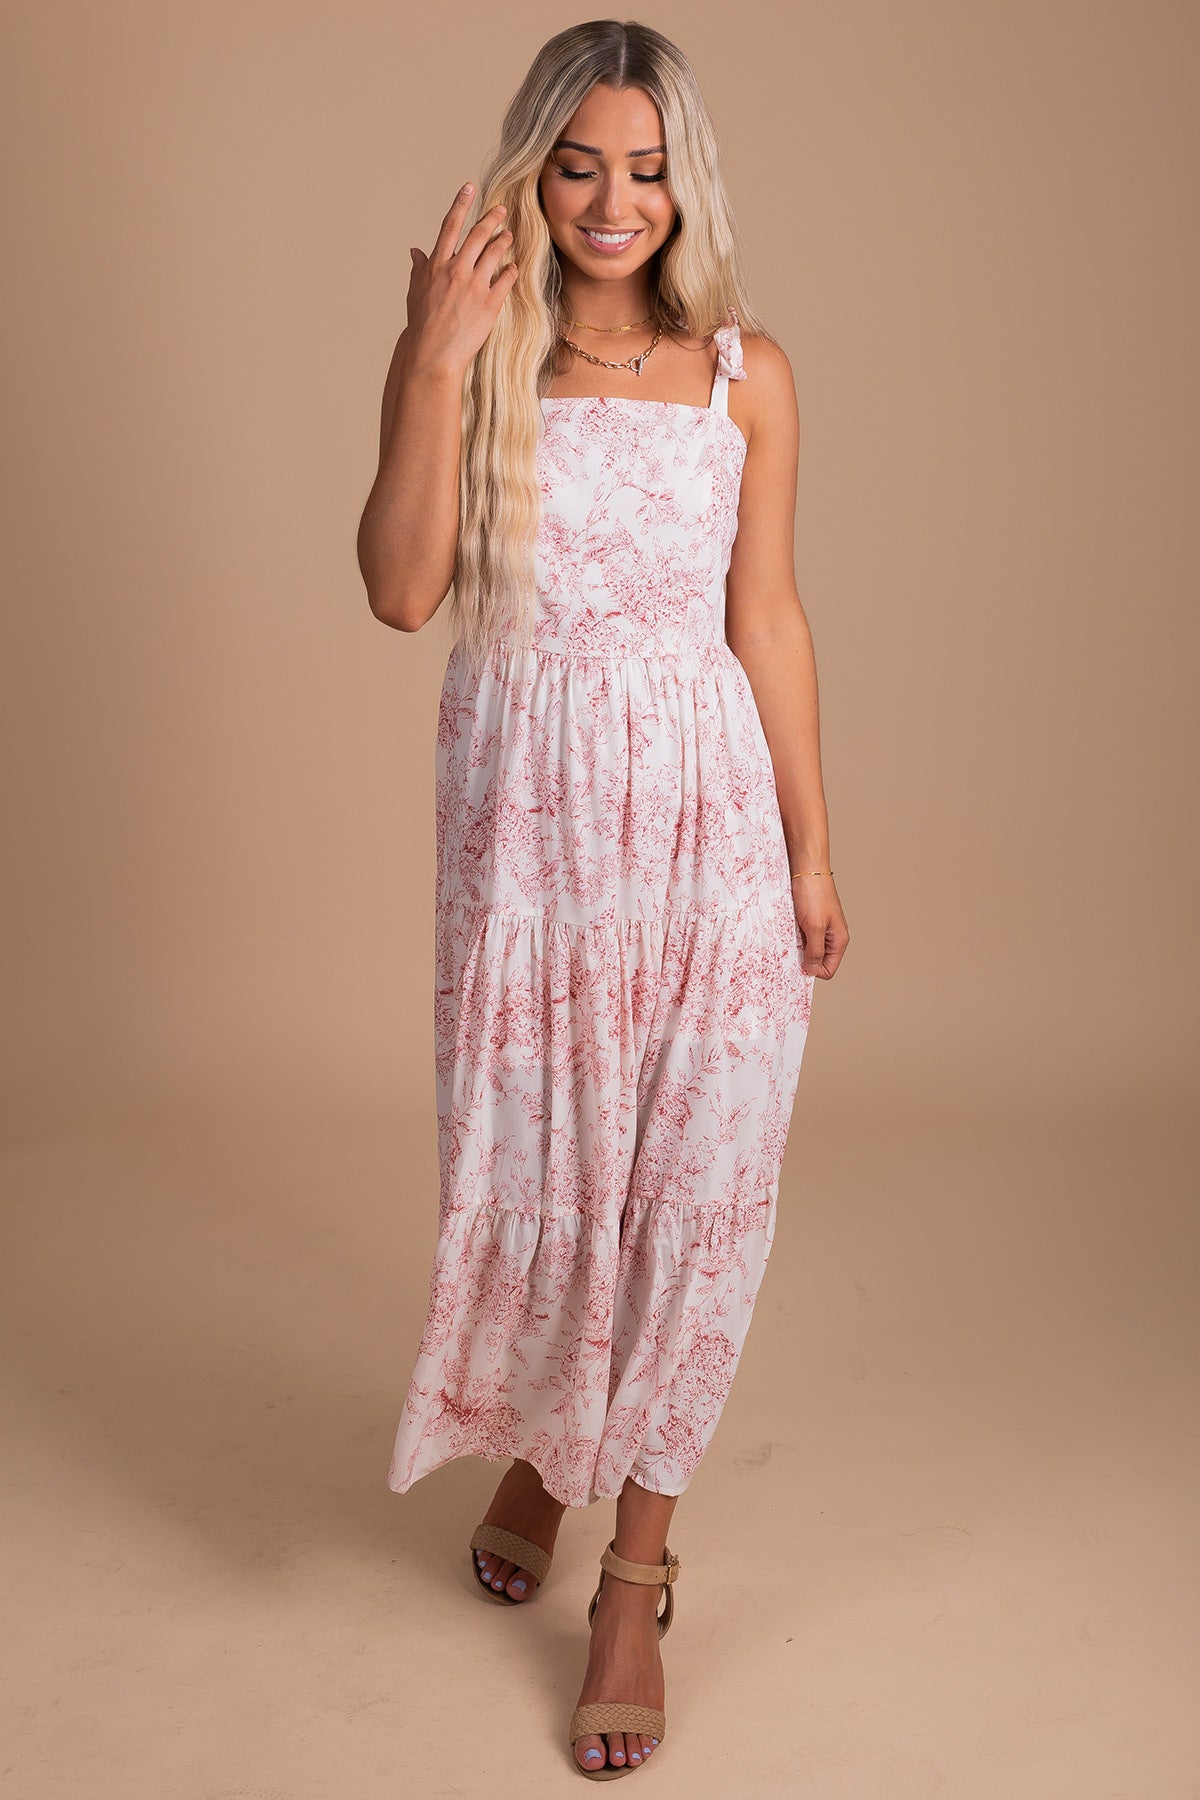 Square Neckline Maxi Dress with Floral Print in Red